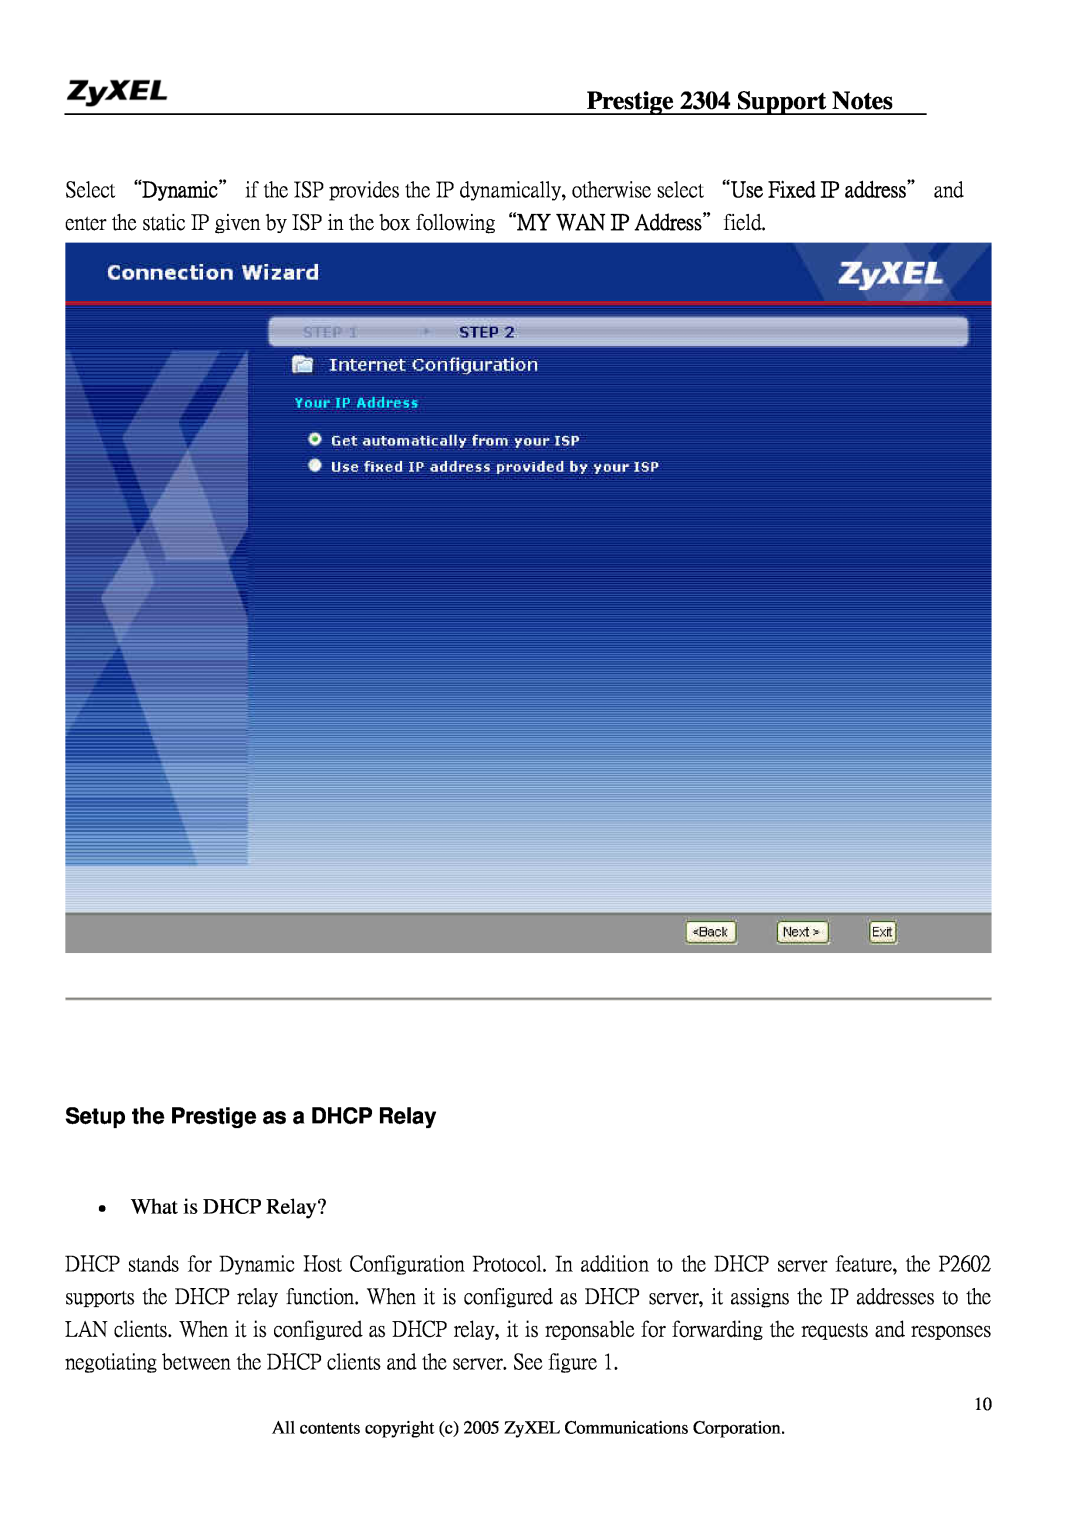 ZyXEL Communications 2304R-P1 manual Setup the Prestige as a DHCP Relay, Prestige 2304 Support Notes, What is DHCP Relay? 